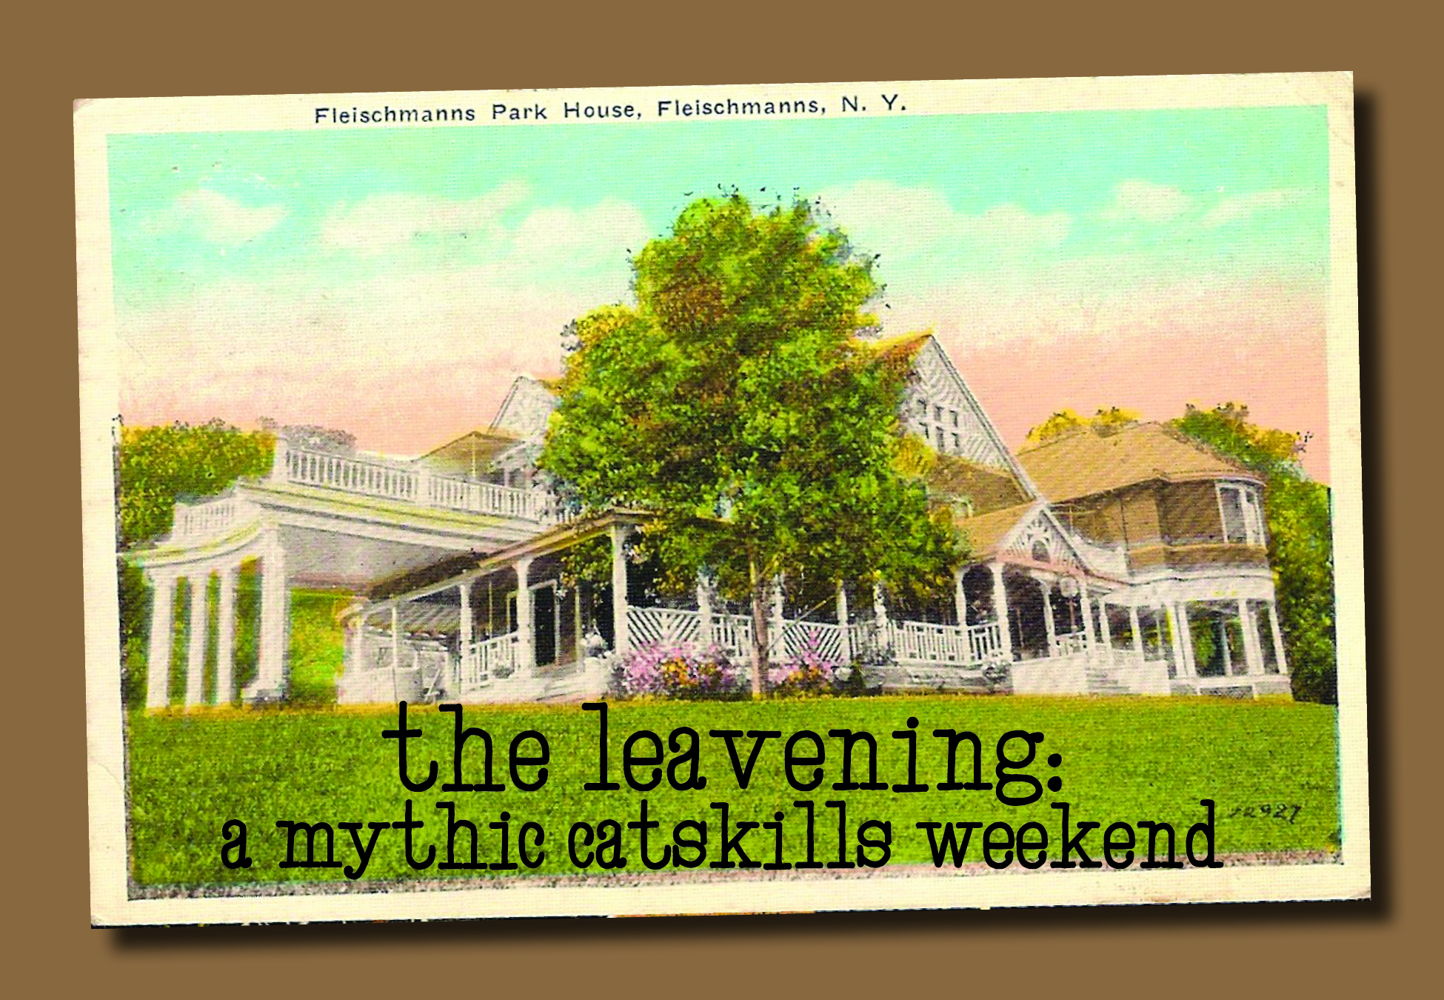 The Leavening: A Mythic Catskills Weekend, June 7 to 9, 2019